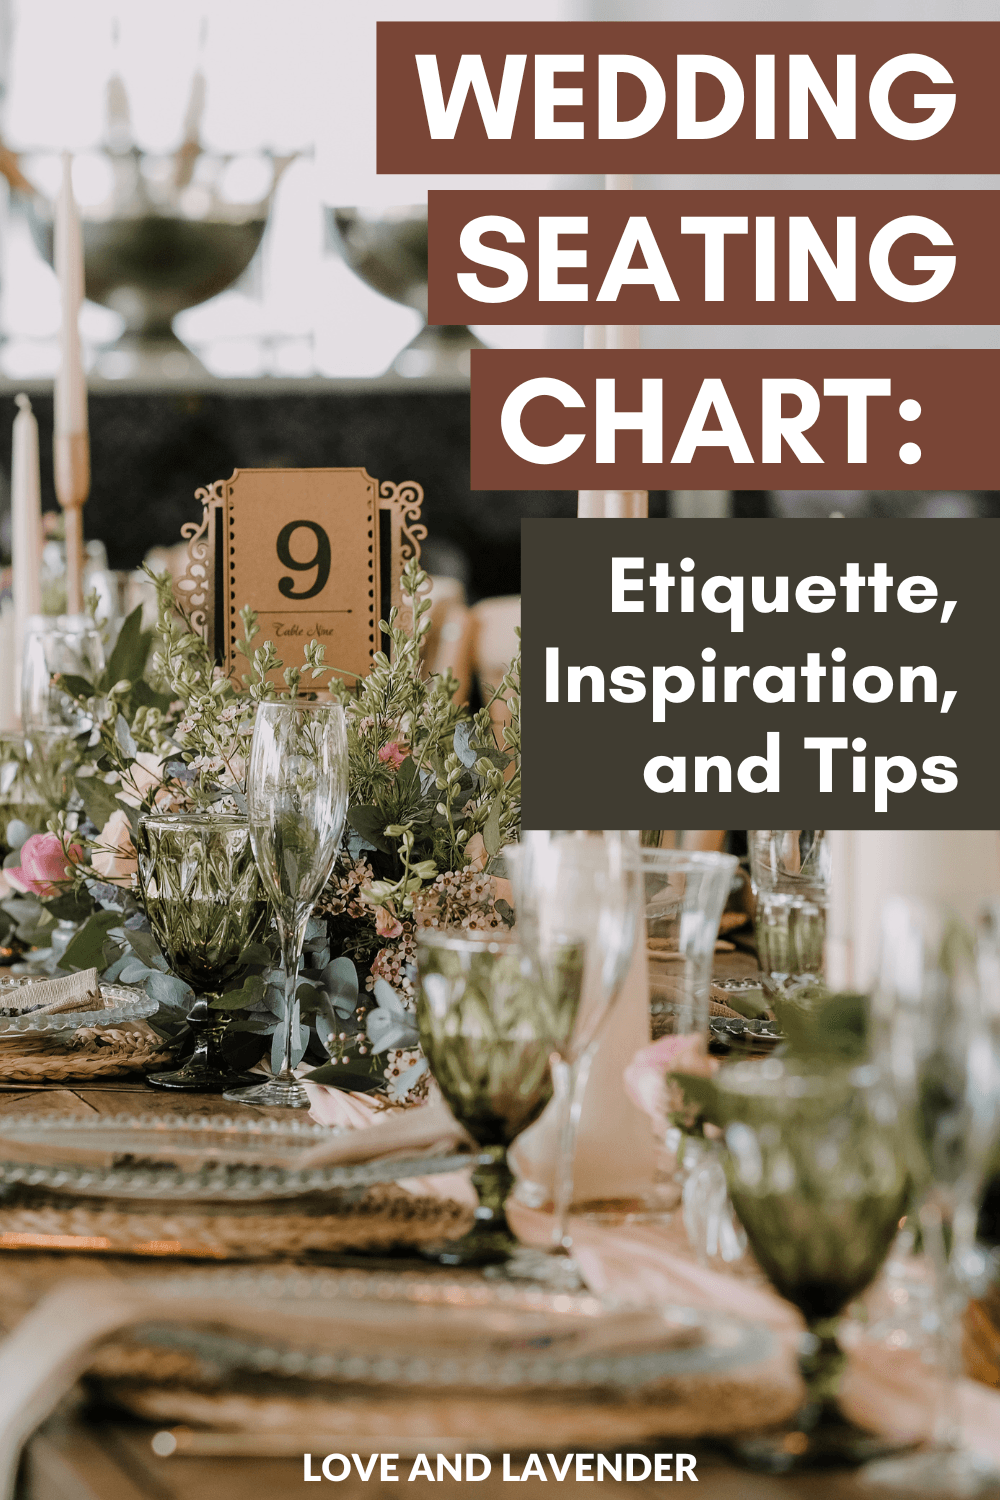 How do you tell all your guests where to sit at your wedding? With an A seating chart, you can make sure that your guests have an easy time finding their tables and seats. This way no one will be lost or confused about which table they're sitting at. Check out this wedding seating chart guide today!